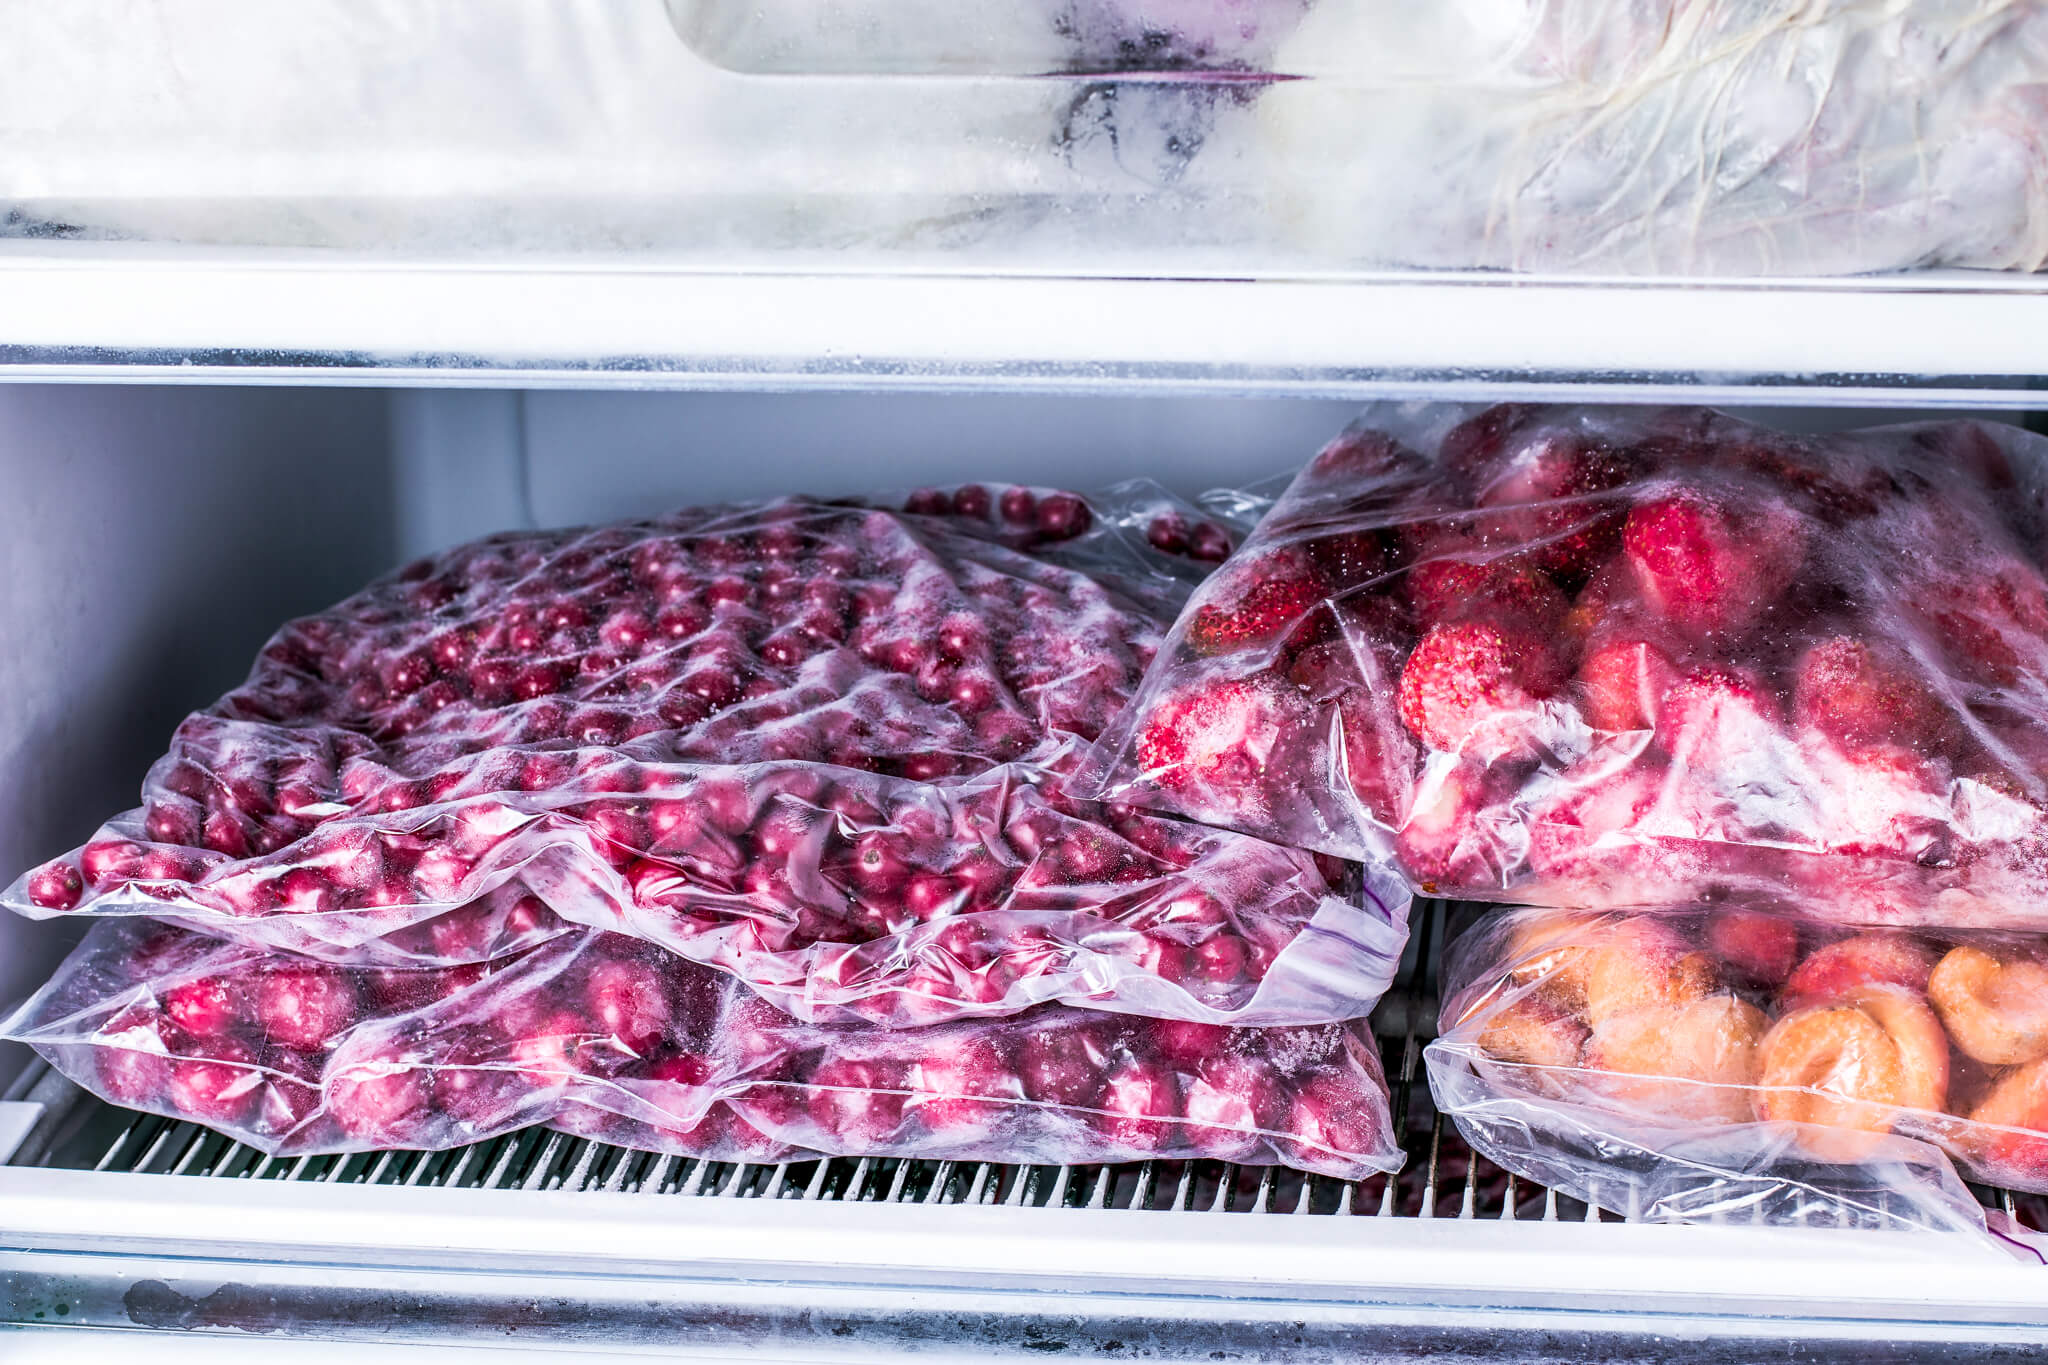 frozen fruits - IoT enables seamless tracking of temperature